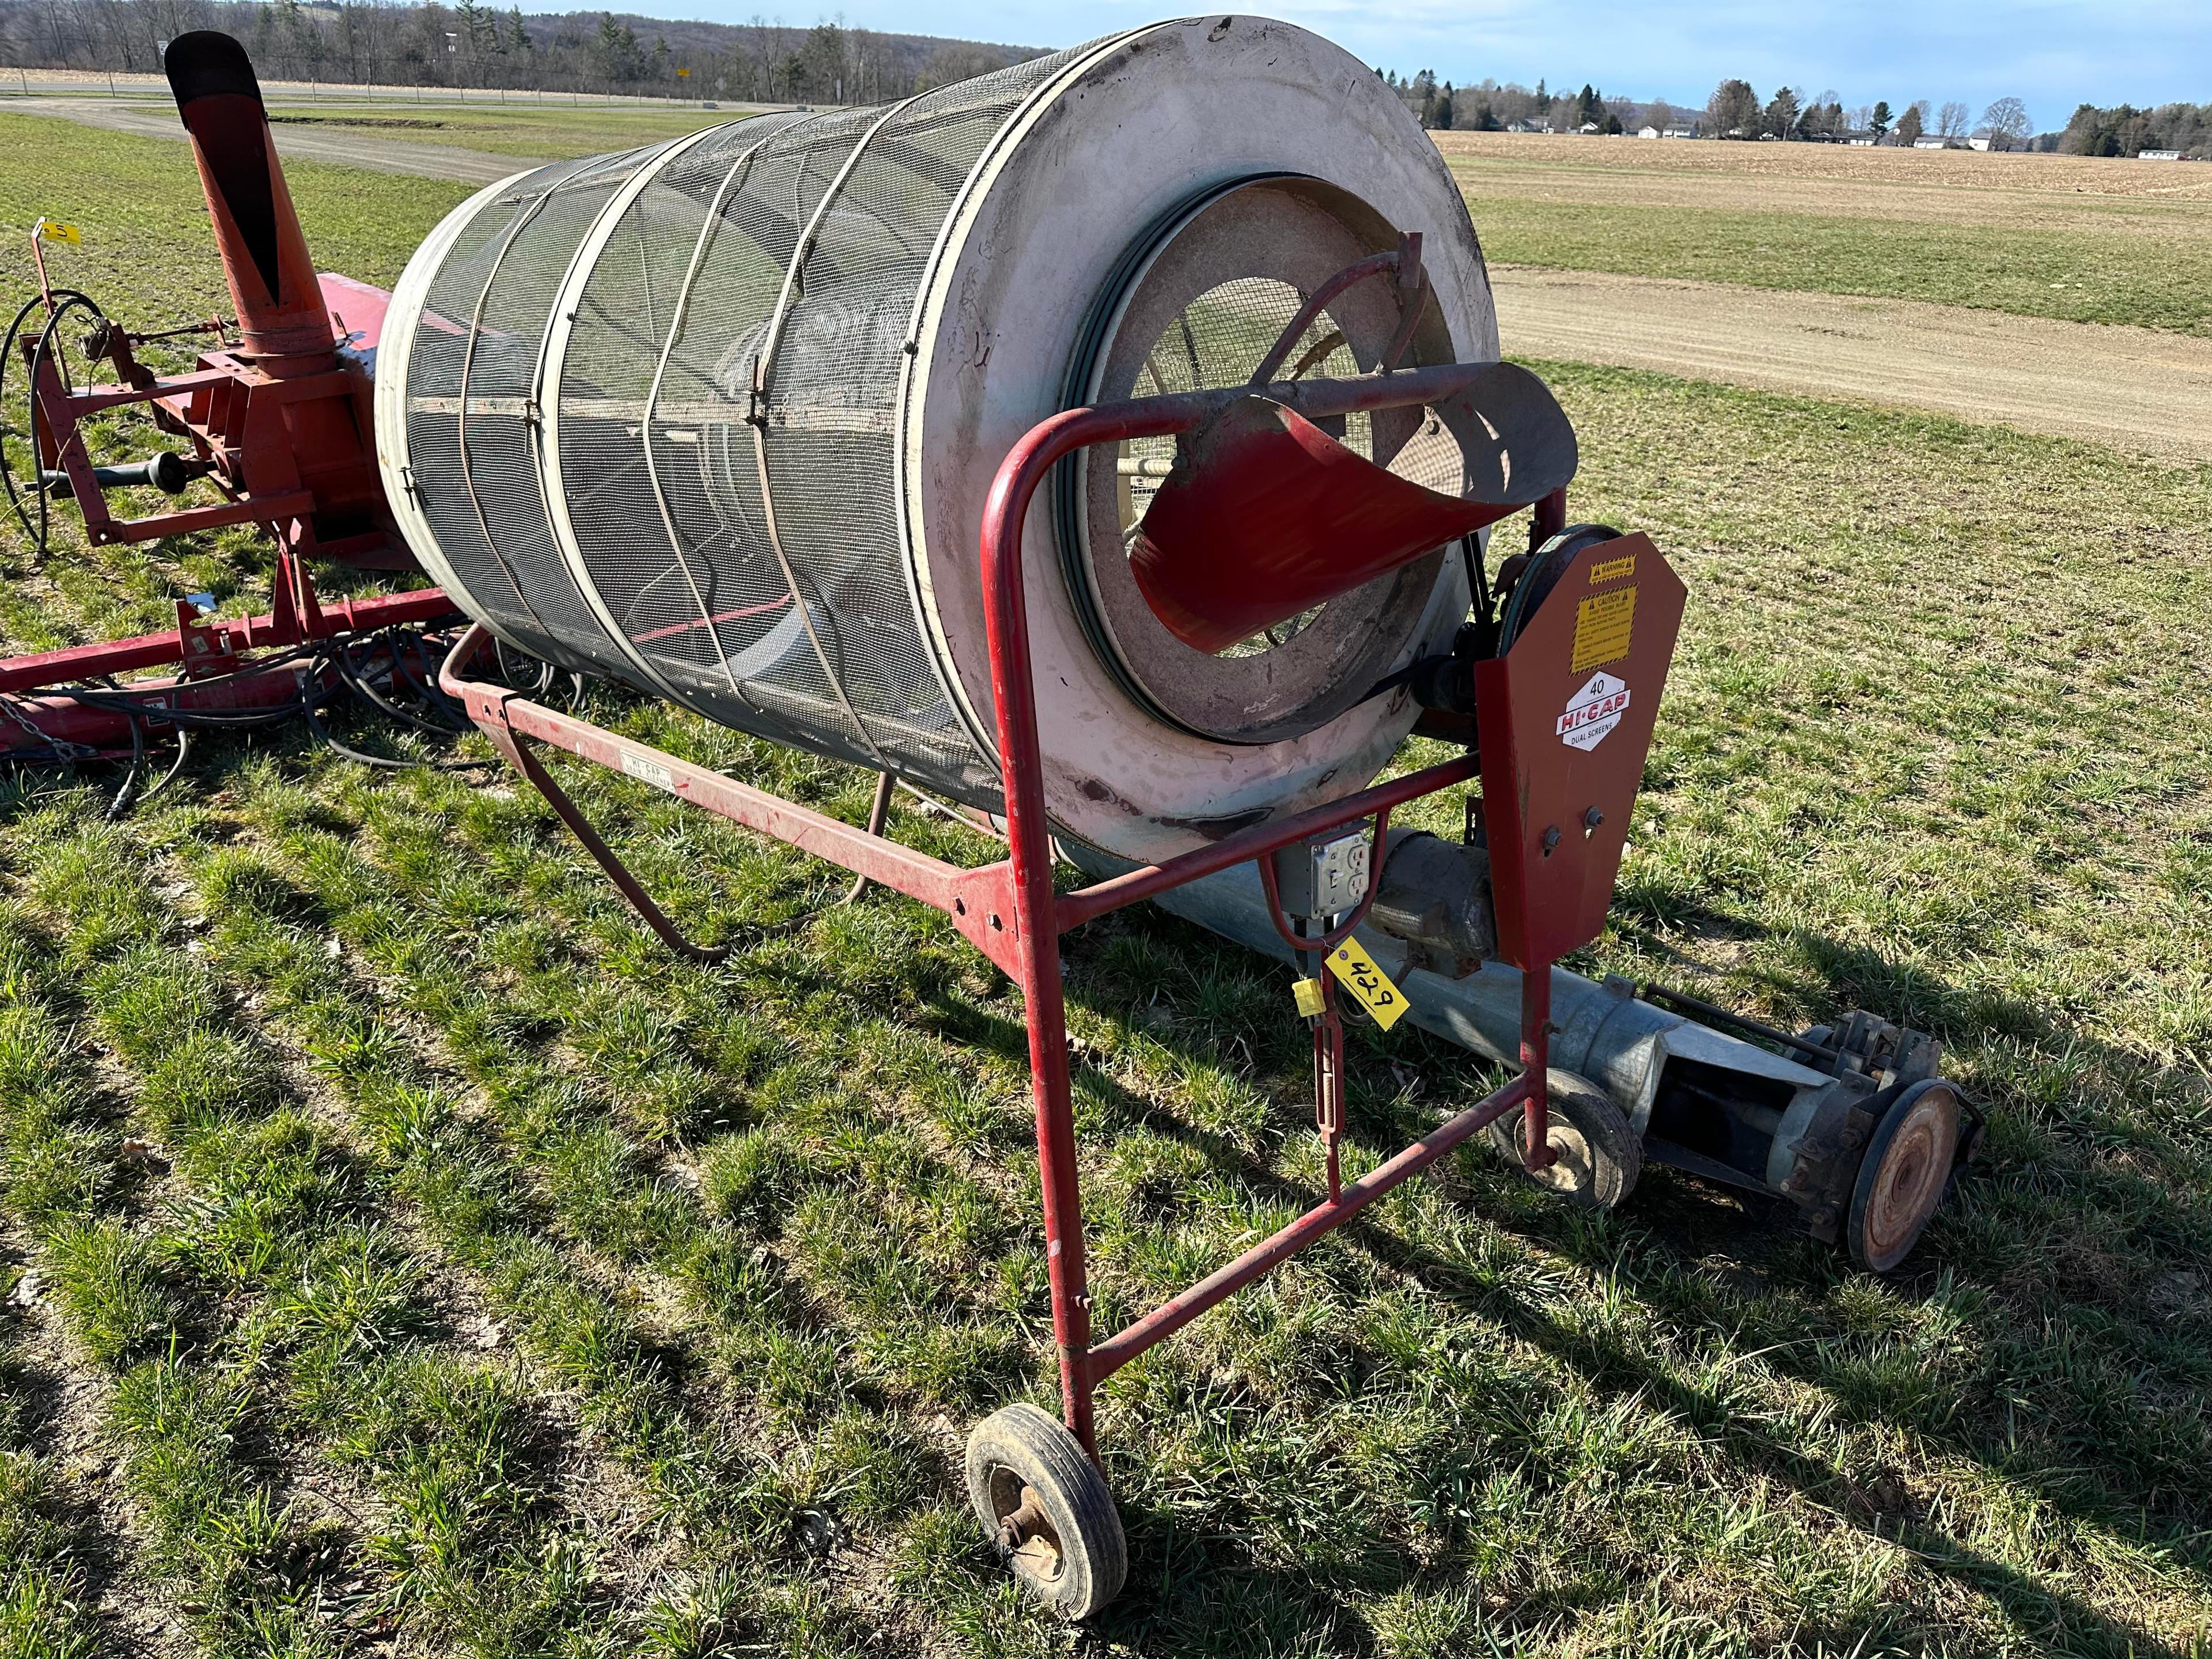 DMC Hi-Cap 40 Grain Cleaner With 7’ Loading Auger, 1 Phase